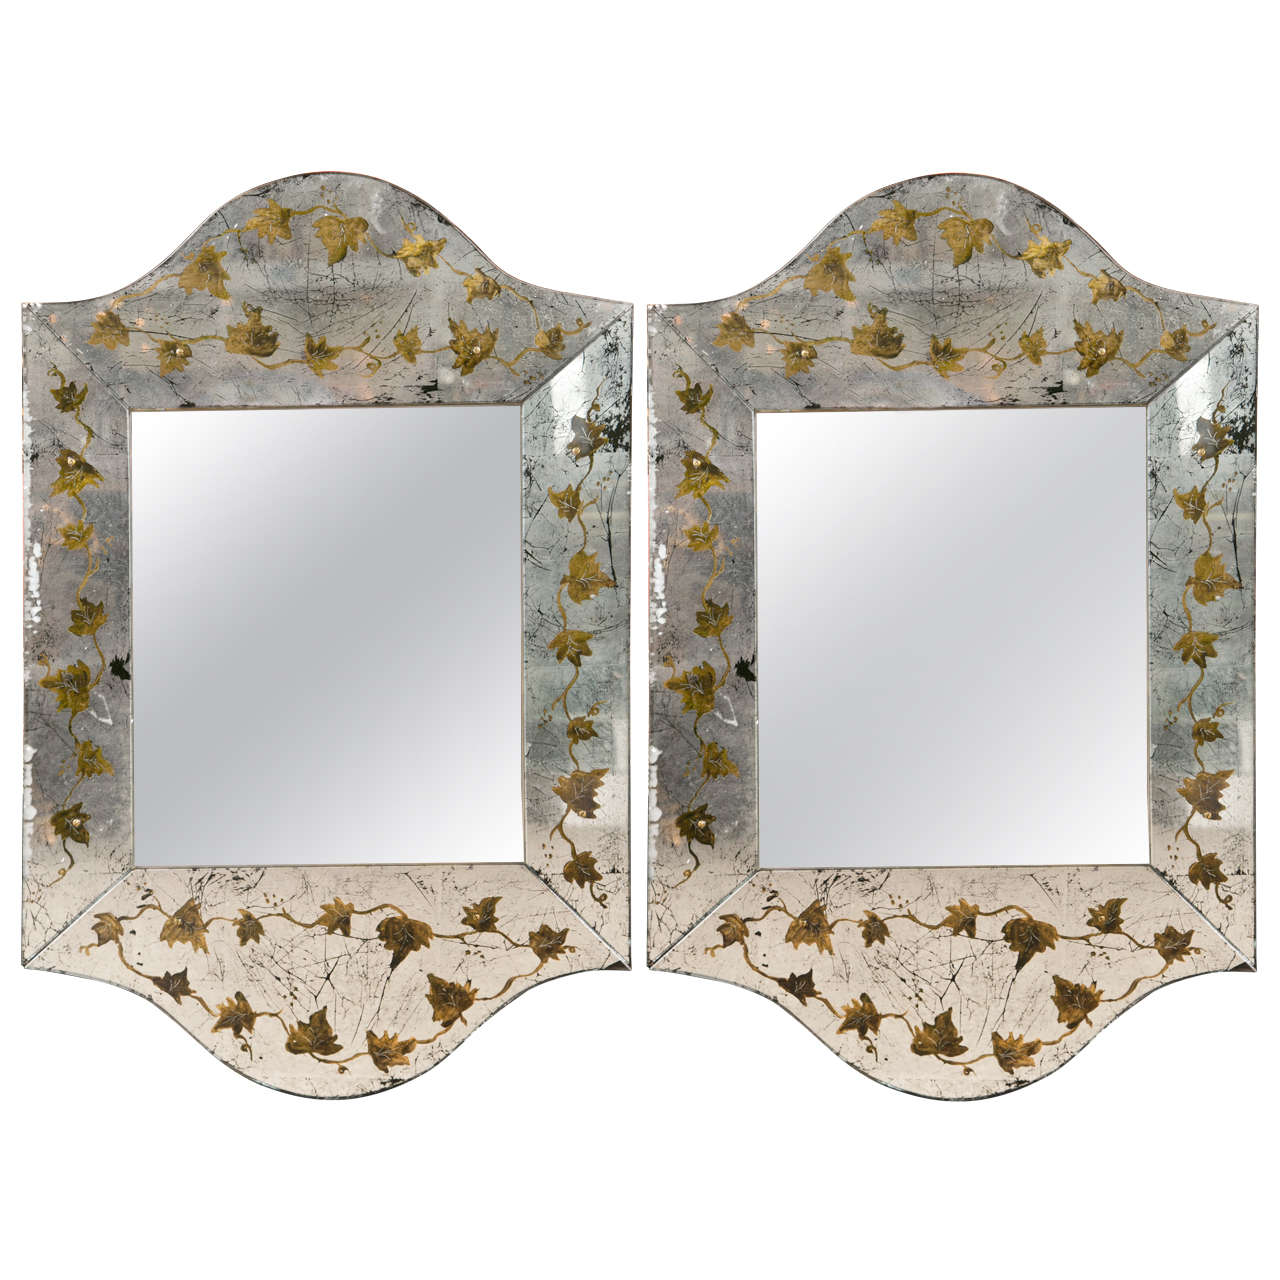 Pair of Eglomise Glass Scalloped Mirrors